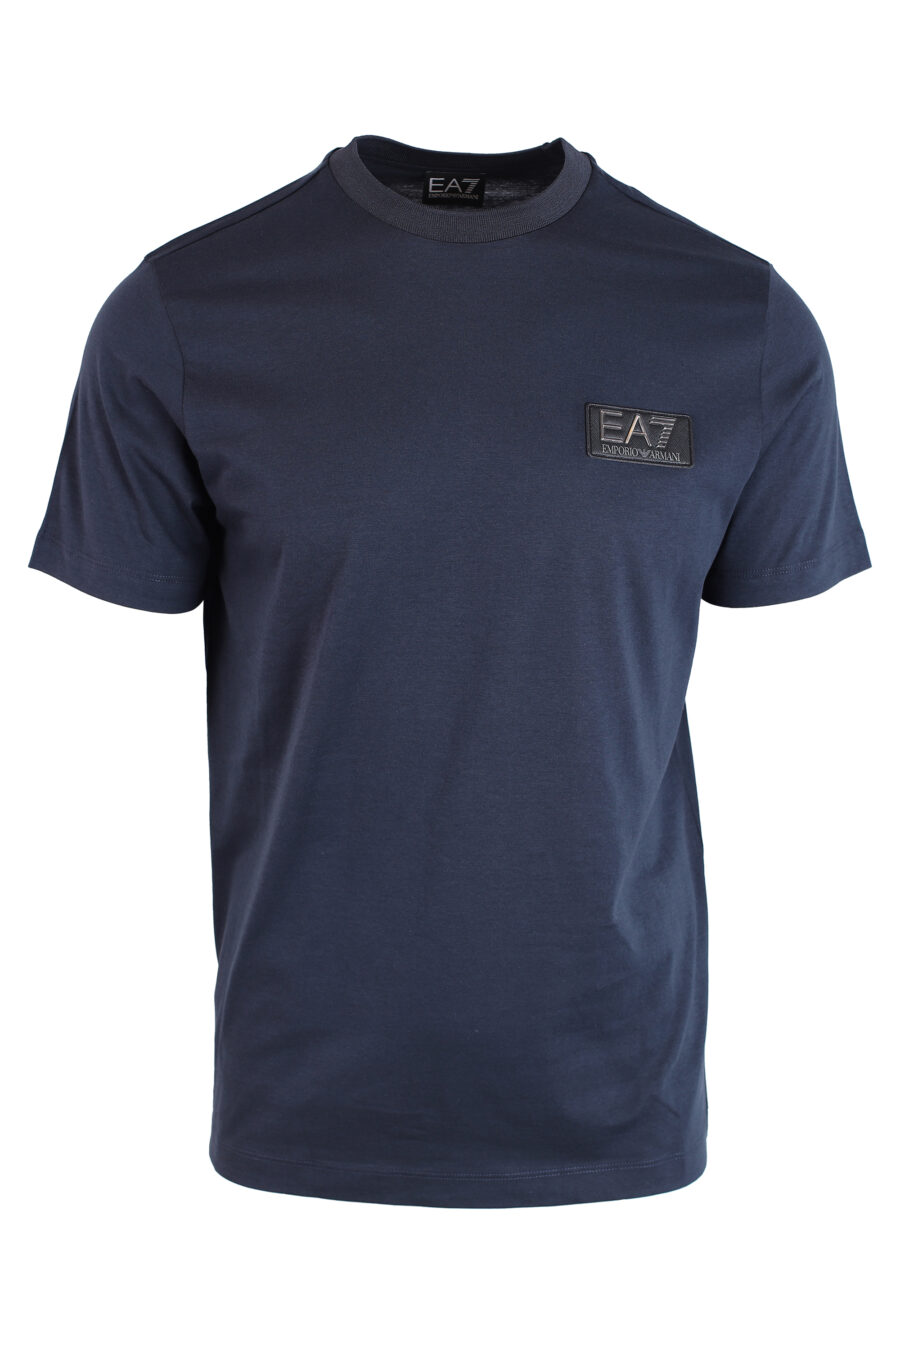 Dark blue T-shirt with mini logo in gold patch - IMG 3230